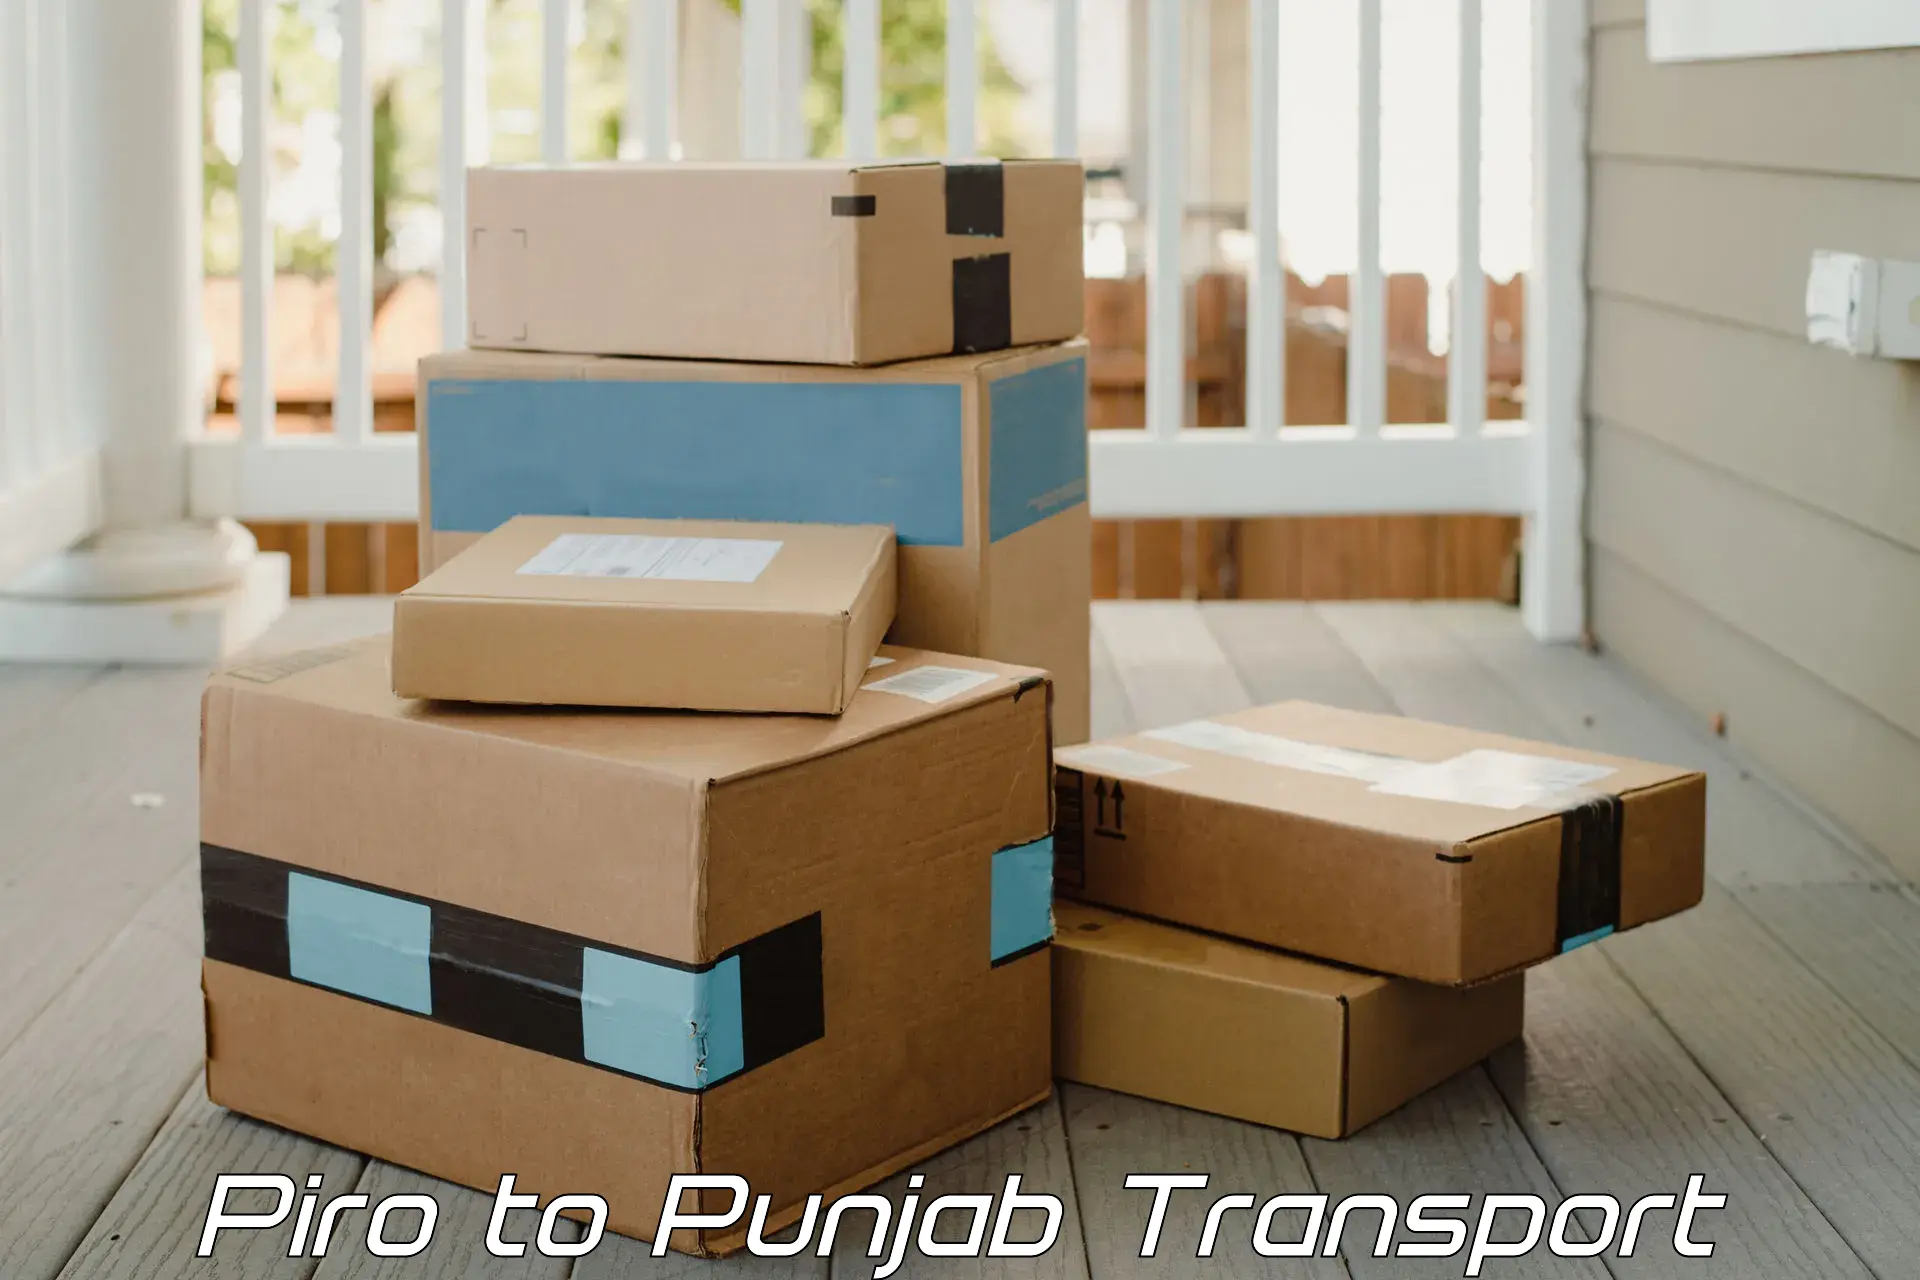 Part load transport service in India Piro to Patiala